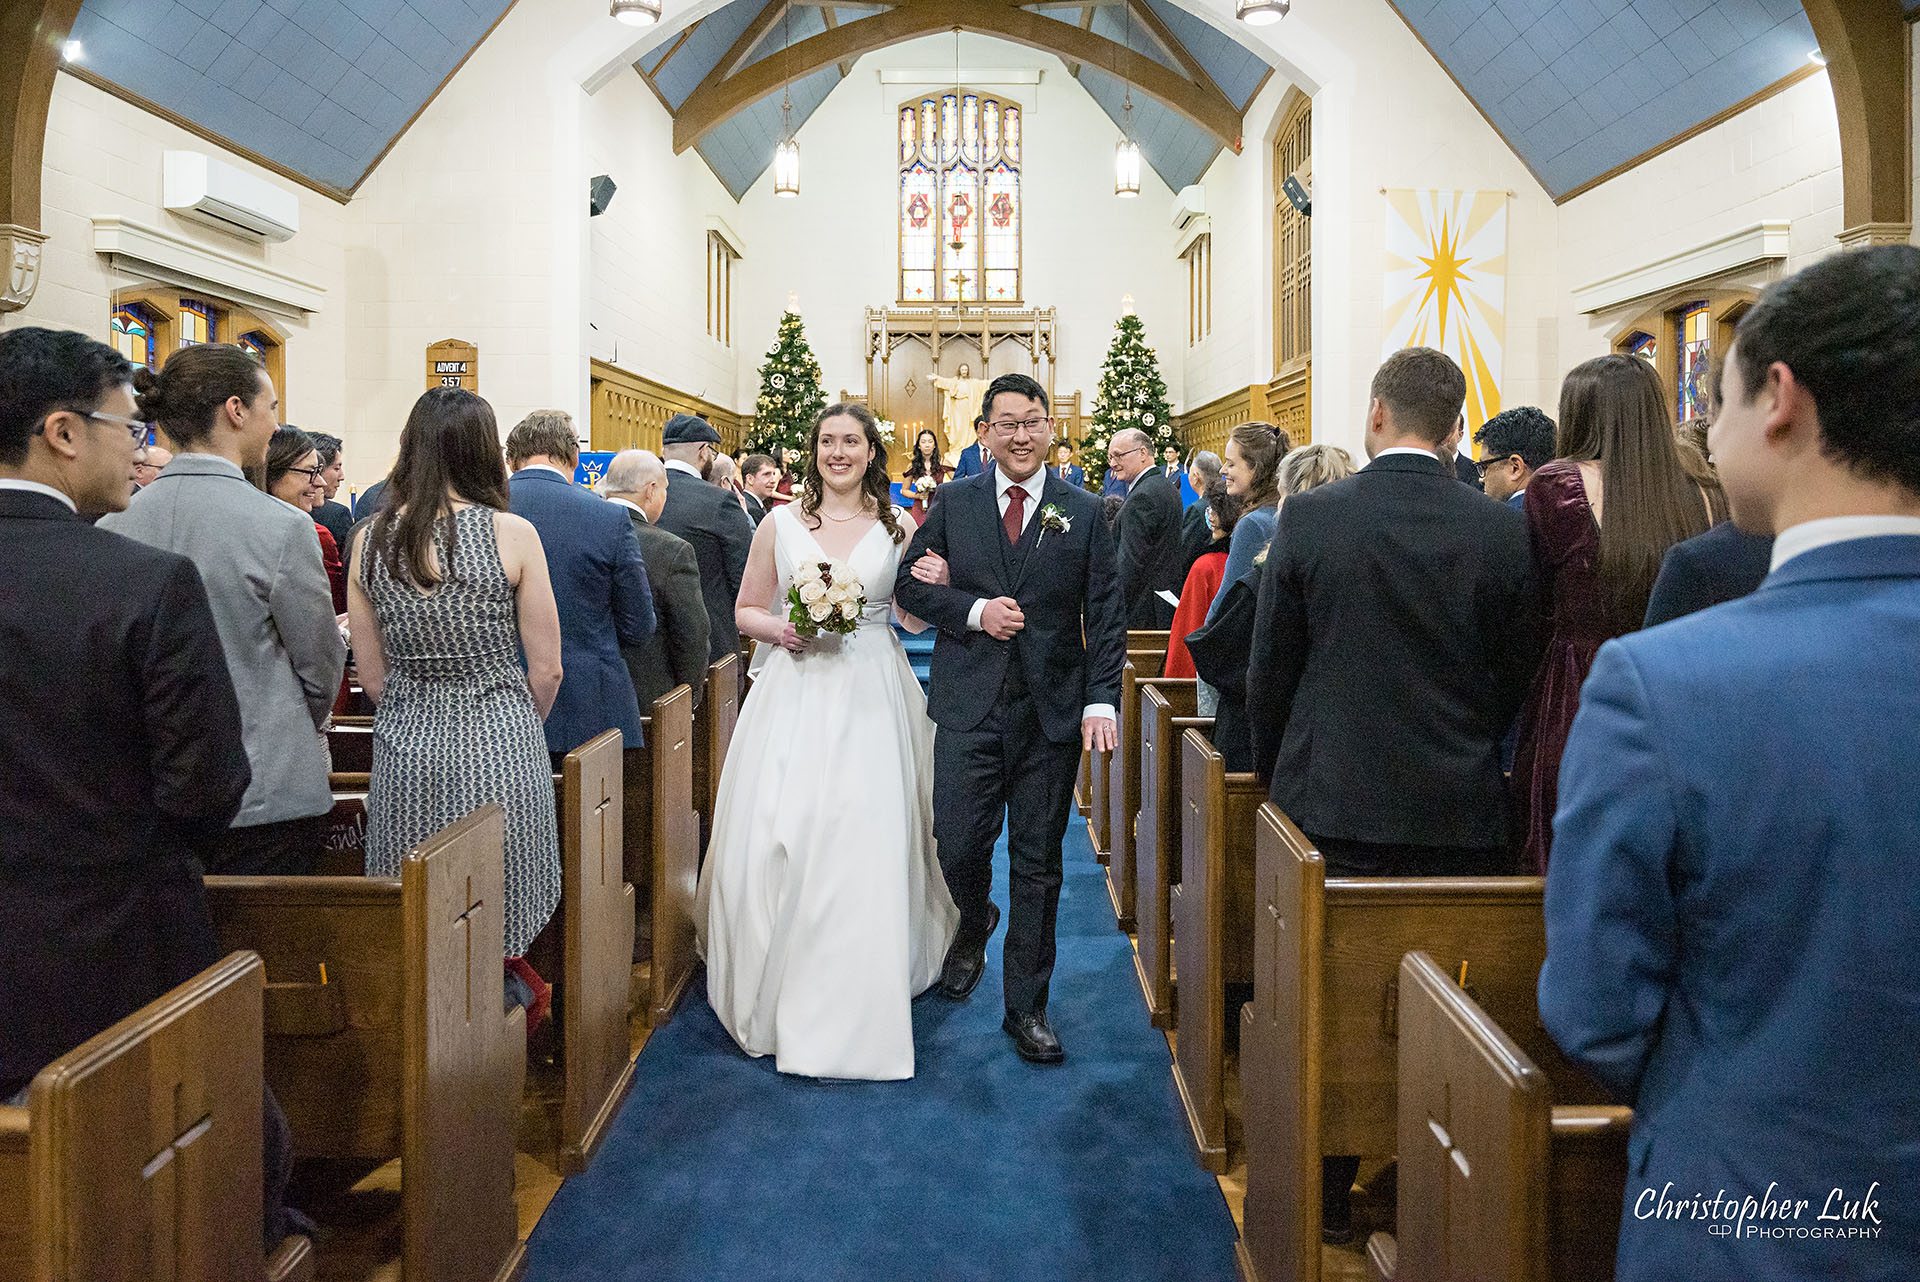 Wedding Ceremony Kitchener Waterloo Church Winter Stained Glass Windows Bride Groom Walking Down the Centre Aisle Together Recessional 